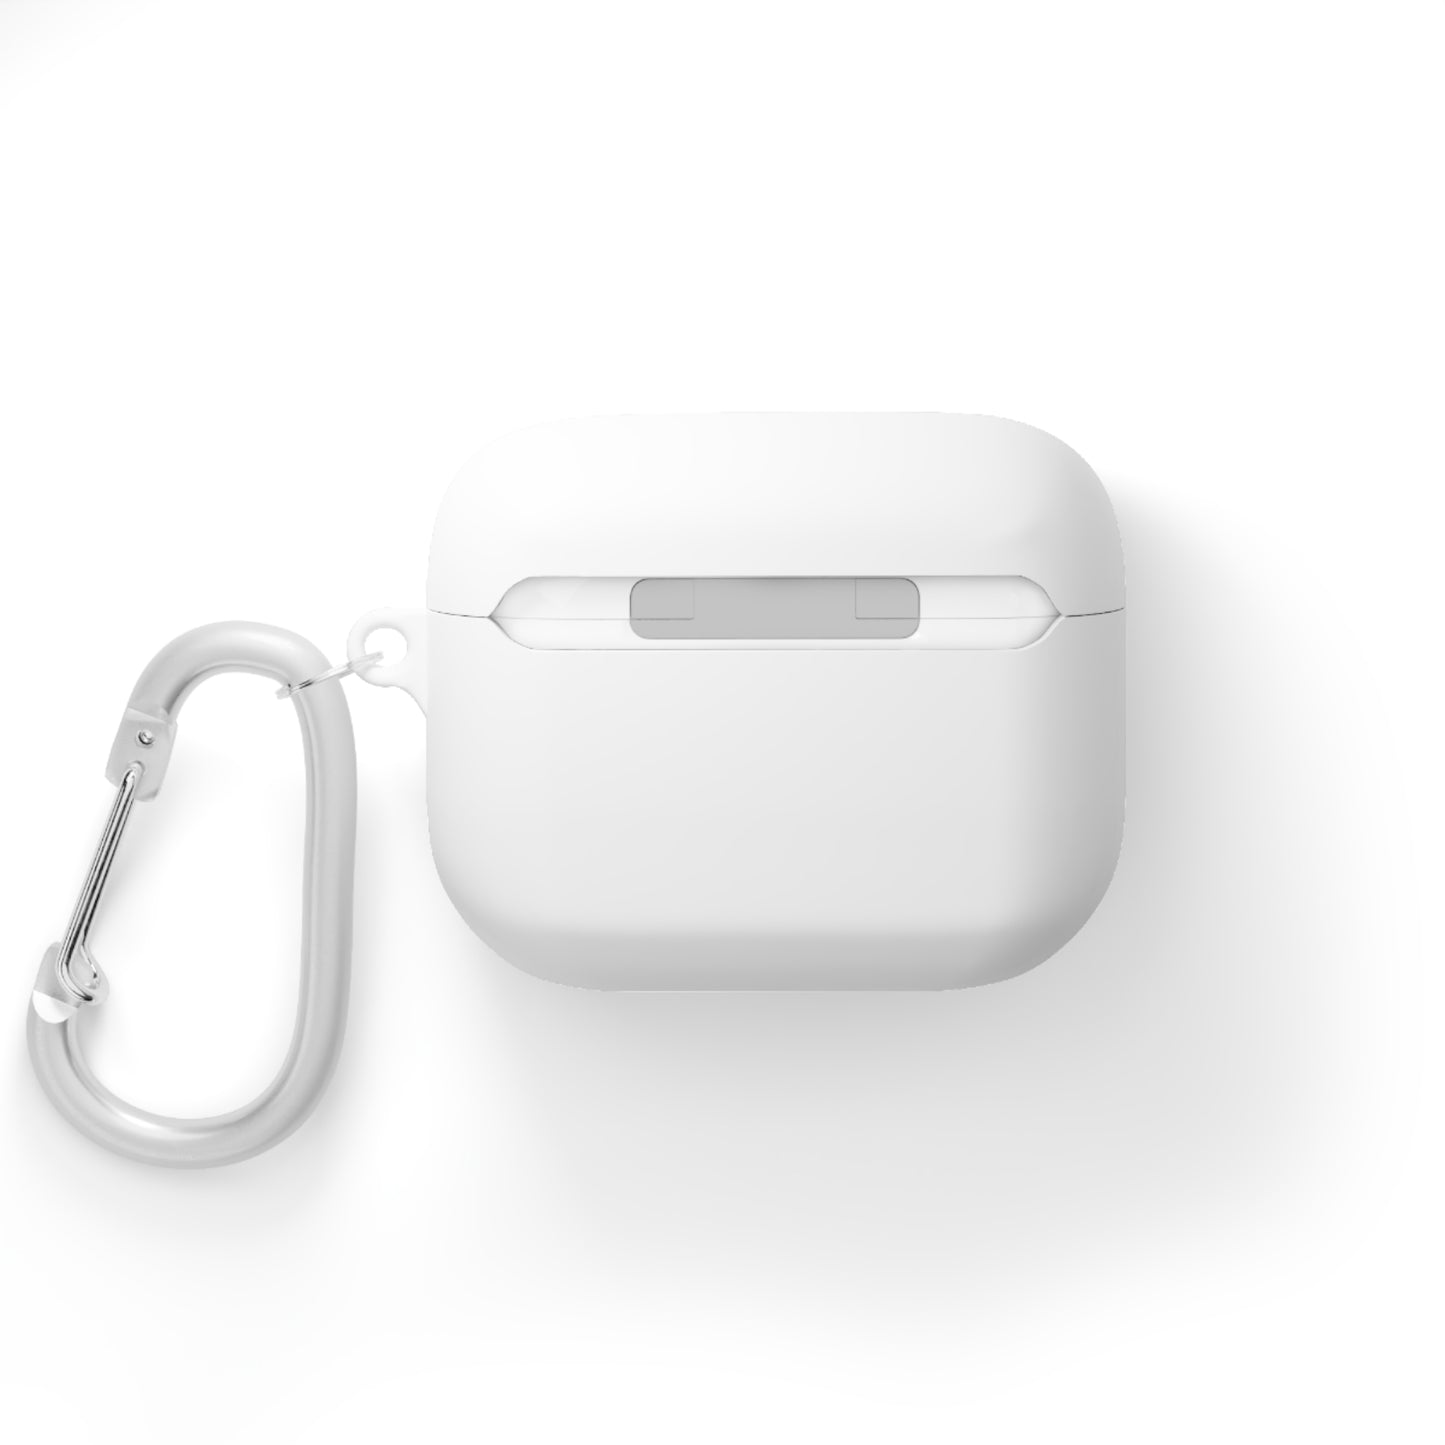 Roland Garros AirPods and AirPods Pro Case Cover